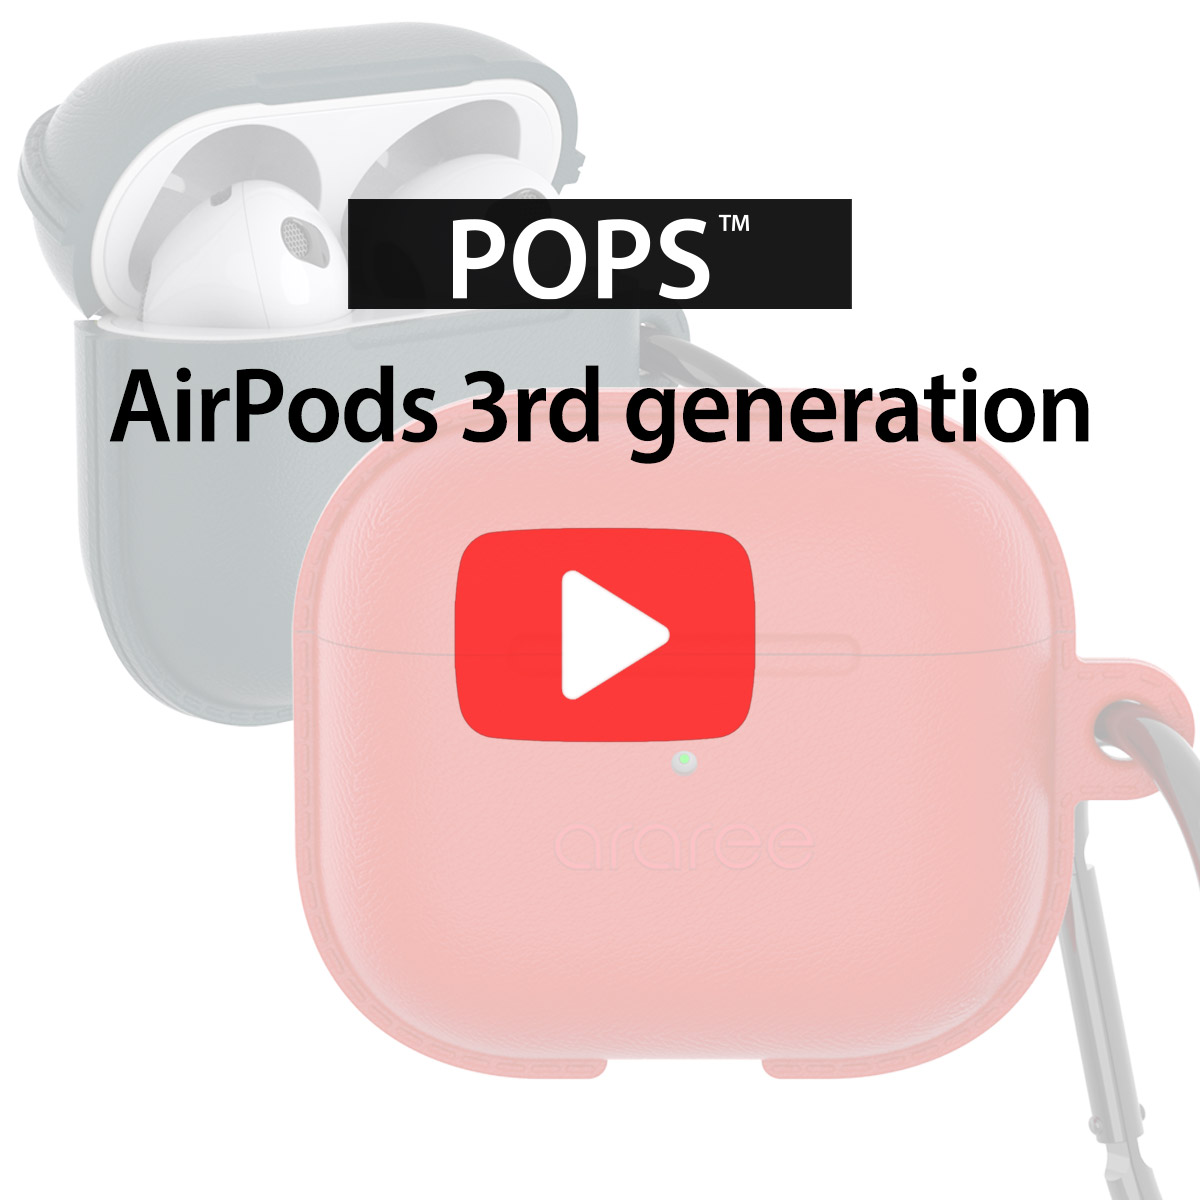 [AirPods 3rd generation] POPS